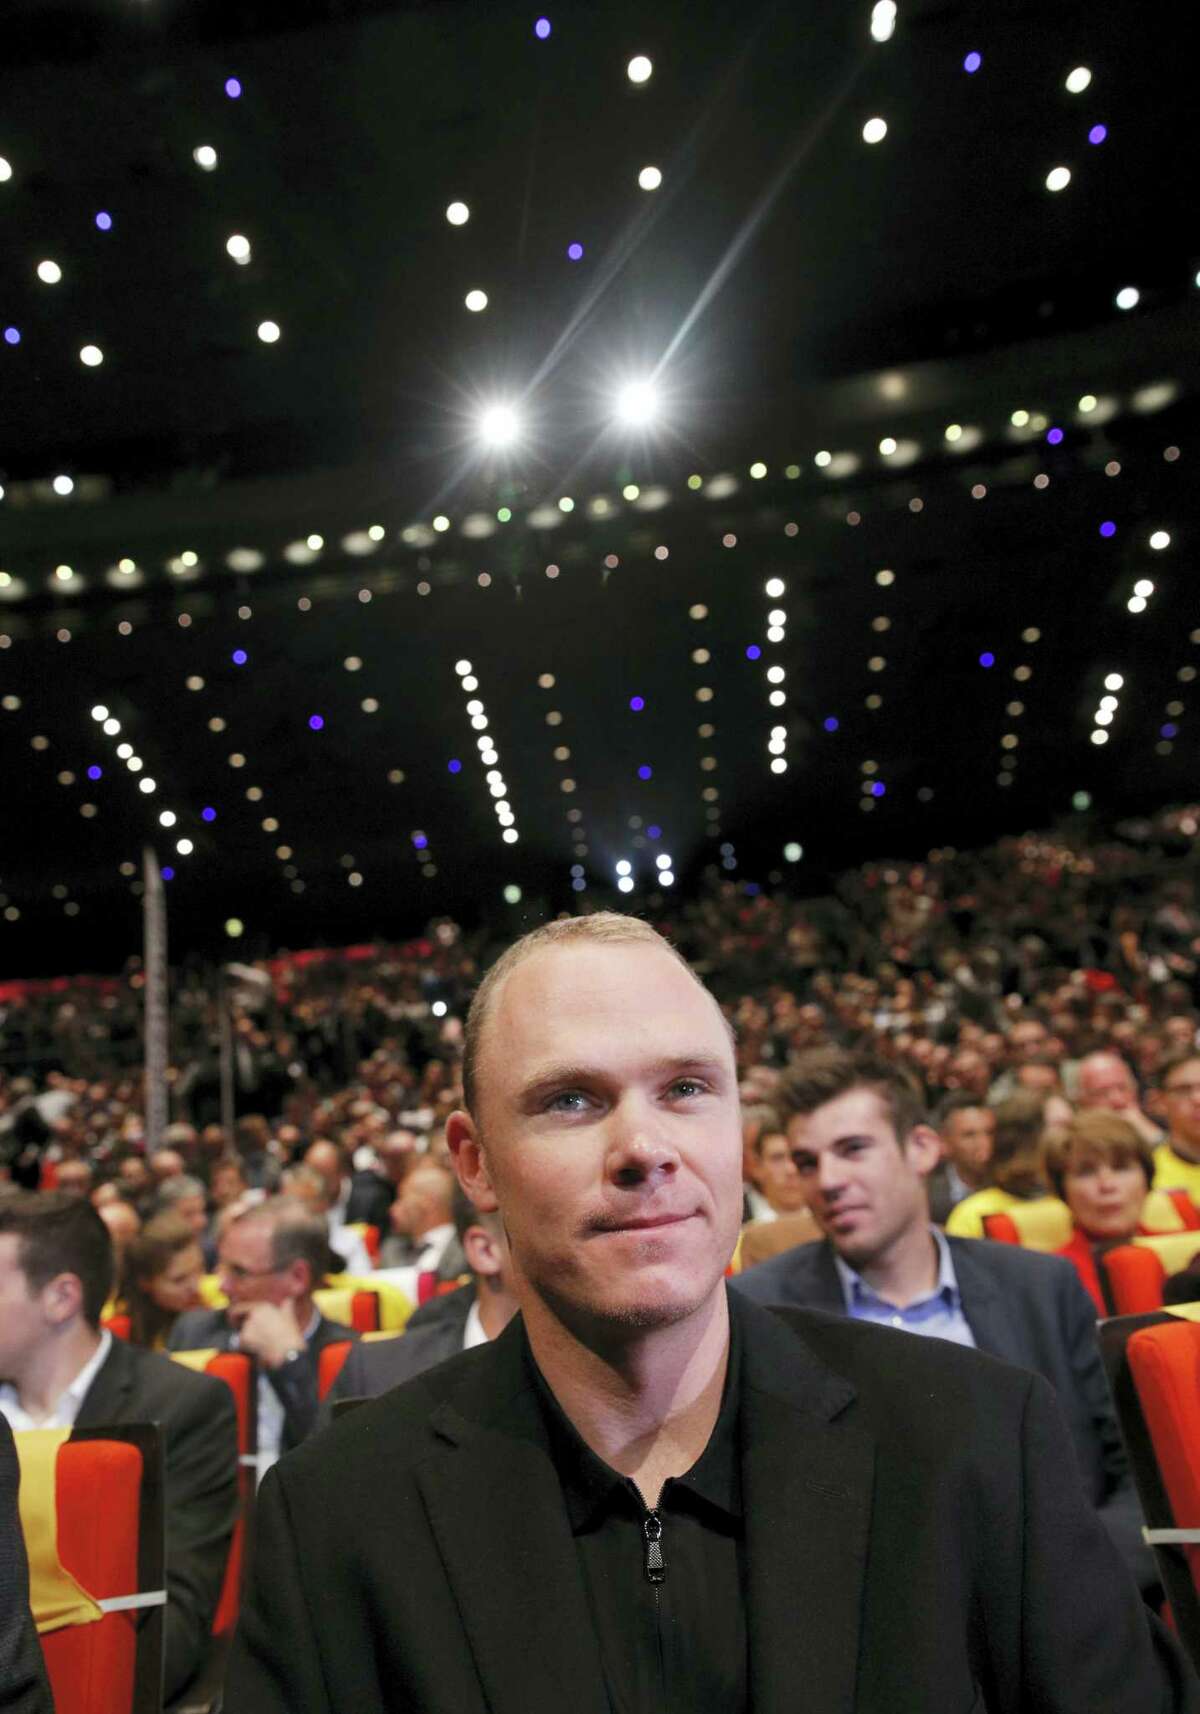 2016 Tour de France winner Chris Froome of Britain attends the presentation of the 2017 Tour de France cycling race in Paris, France on Oct. 18, 2016. The race will start on July, 1, 2017 with a prologue in Dusseldorf, Germany, and counts 20 stages.